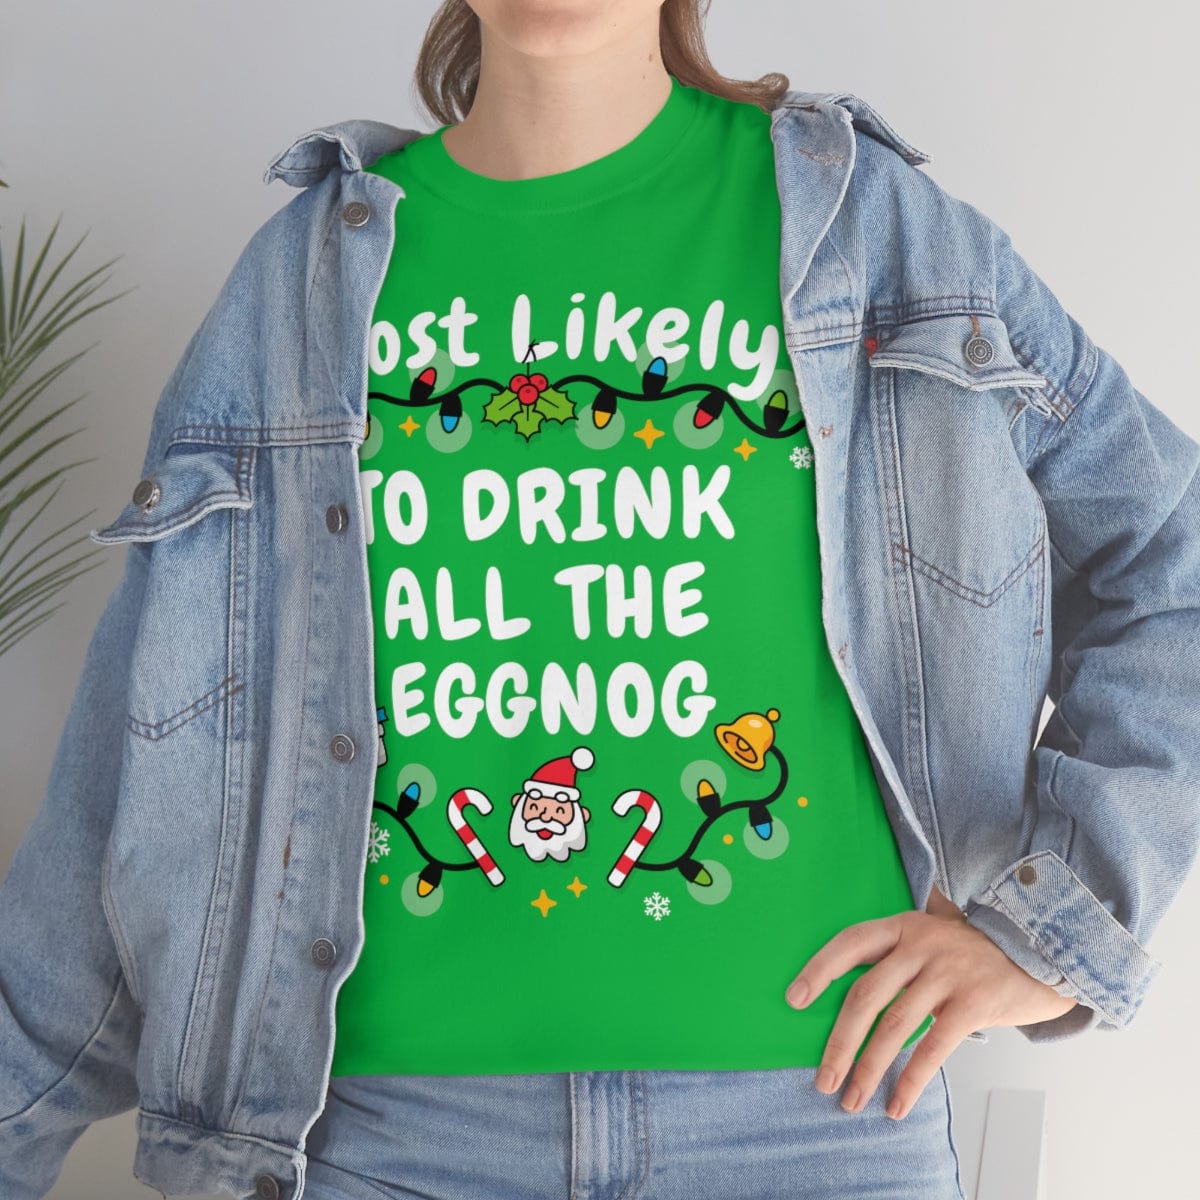 TO DRINK ALL THE EGGNOG